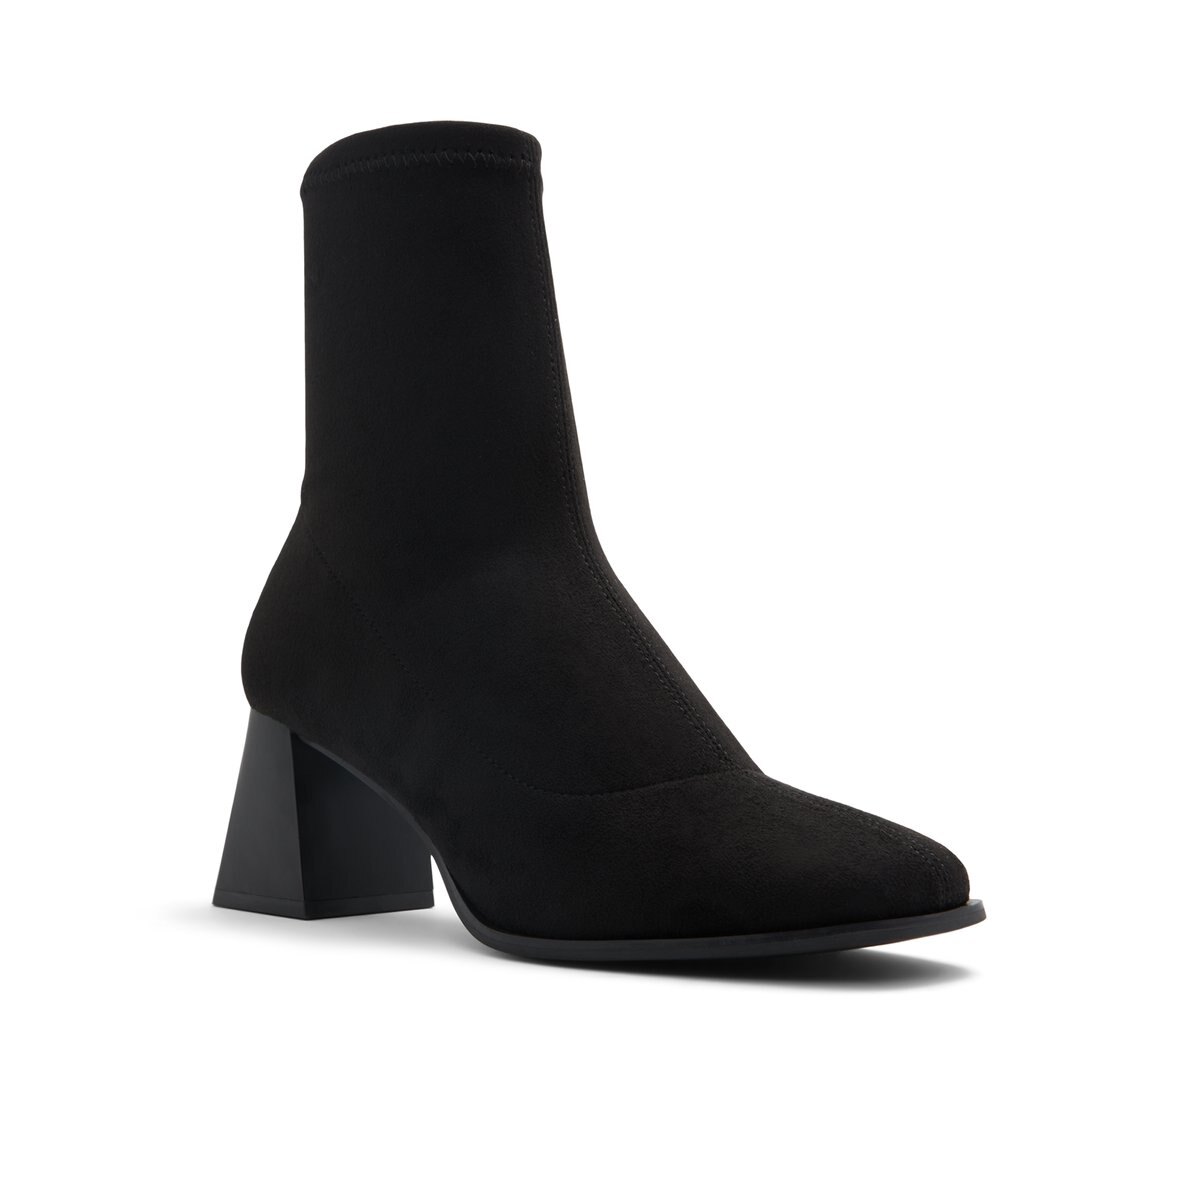 Mikenna Black Textile Microfibre Women's Ankle Boots | Call It